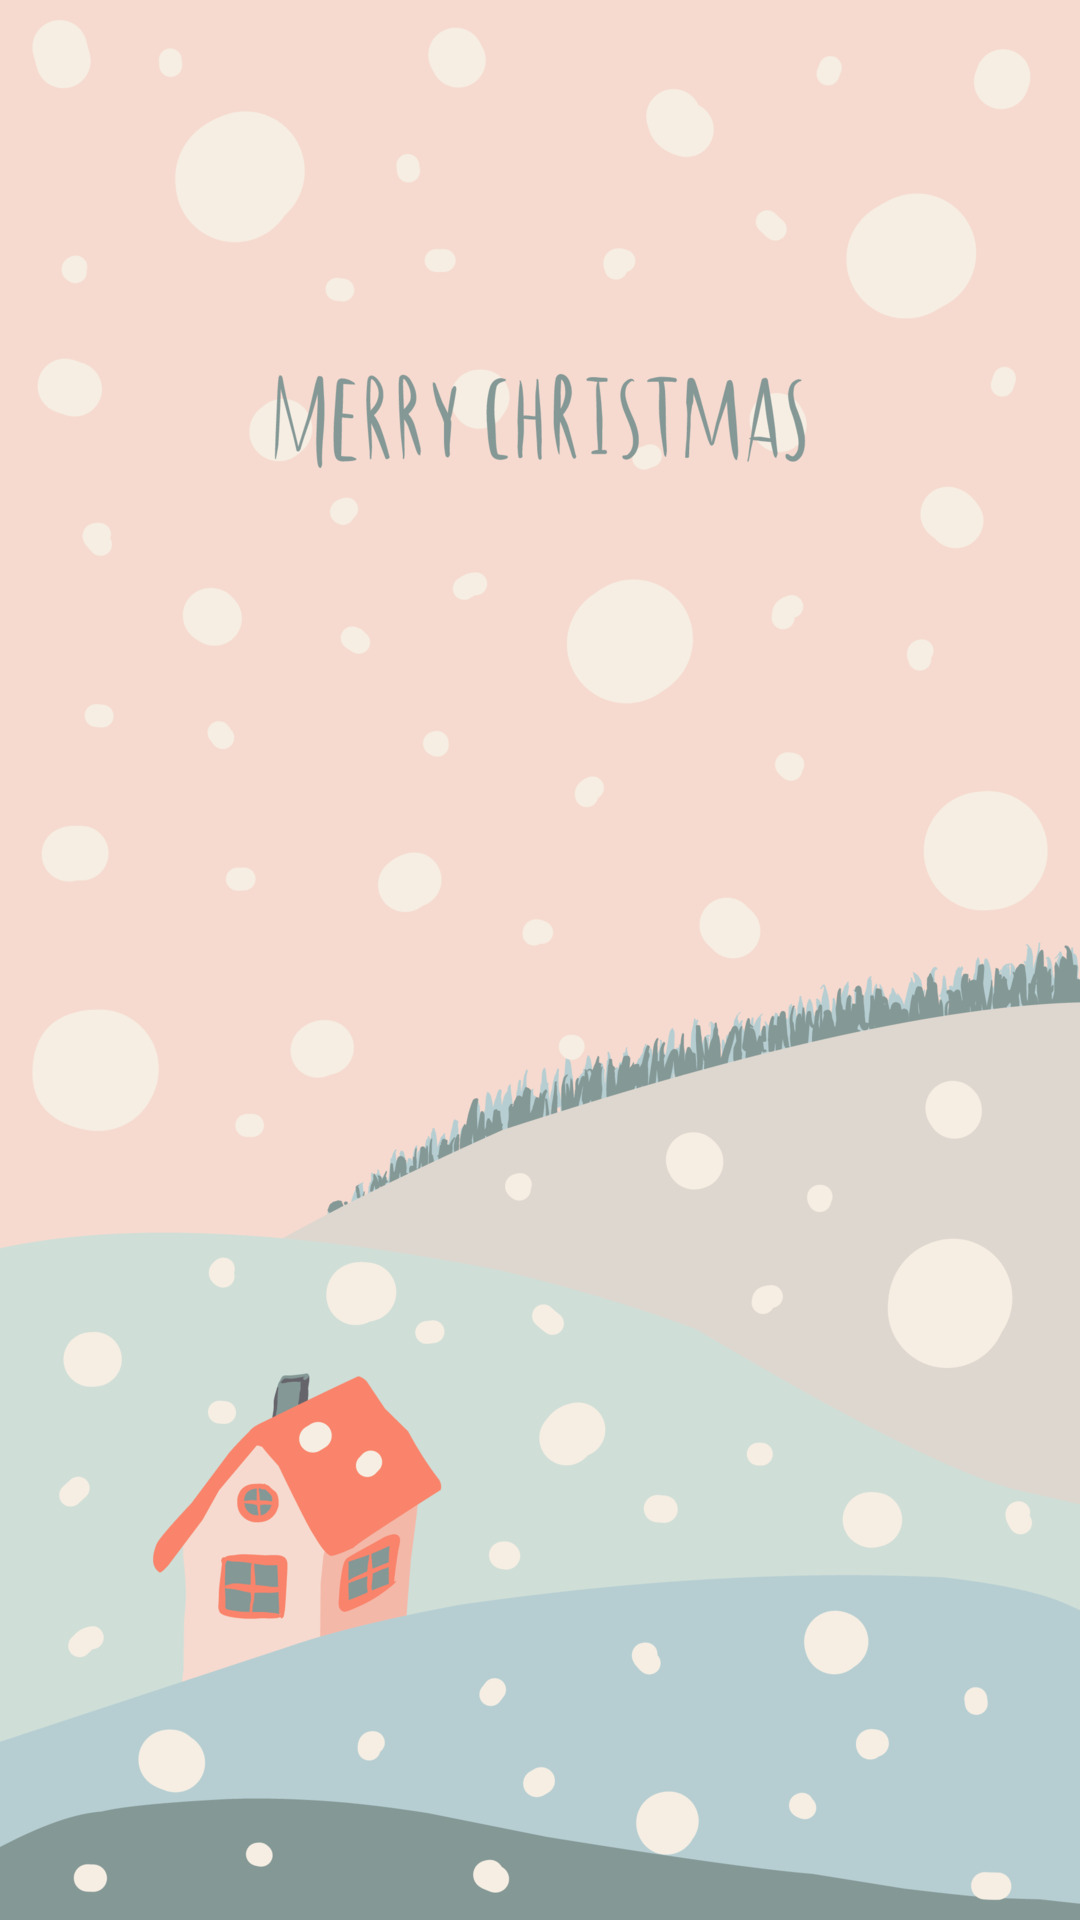 Cute Christmas Backgrounds Images  Free Download on Freepik